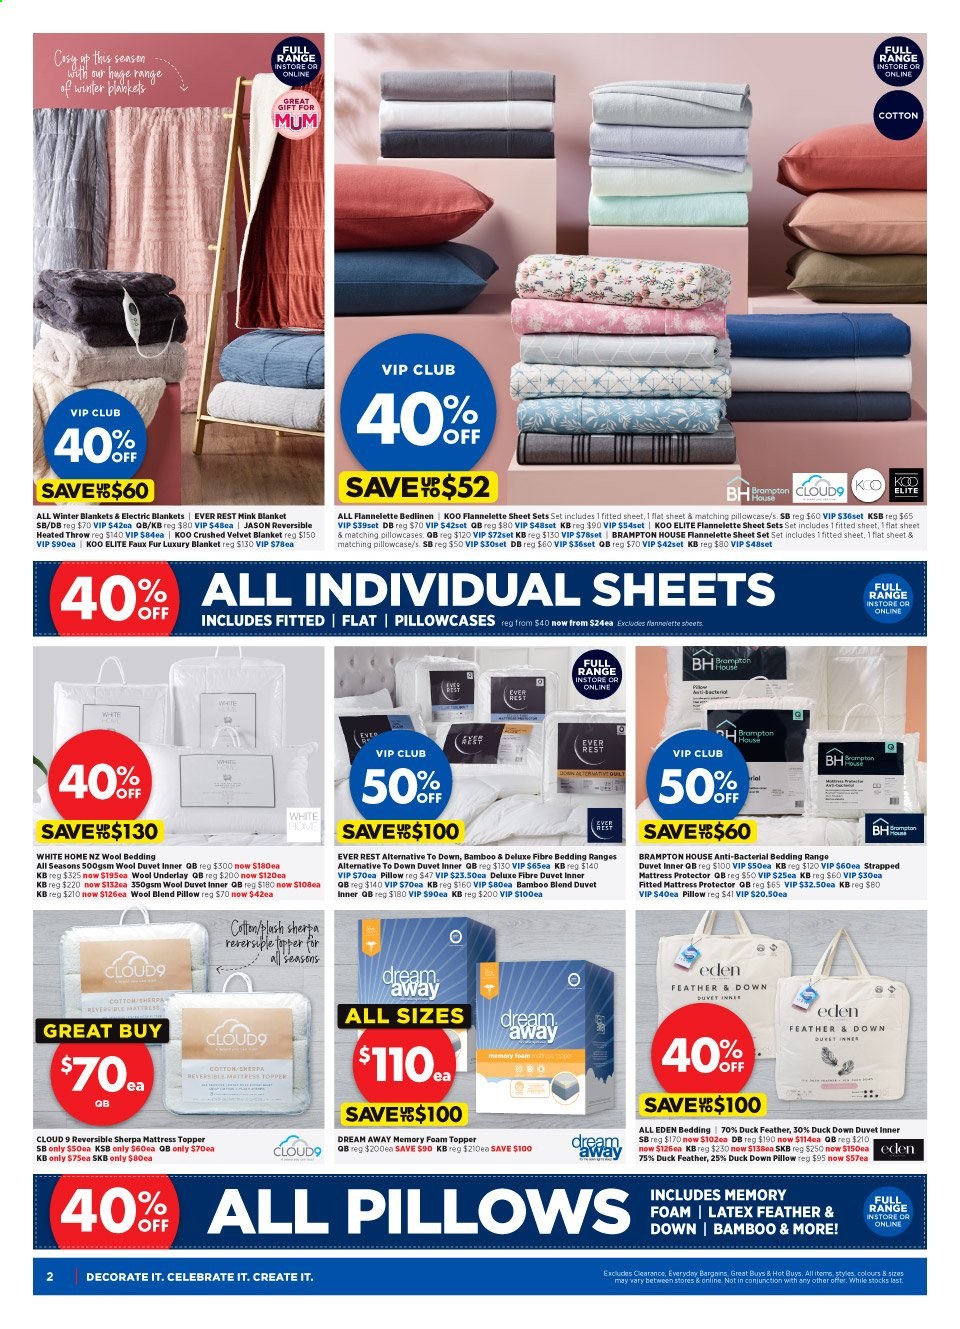 thumbnail - Spotlight mailer - 28.04.2021 - 09.05.2021 - Sales products - topper, bedding, blanket, duvet, pillow, pillowcase, mattress protector, flannelette sheets. Page 2.